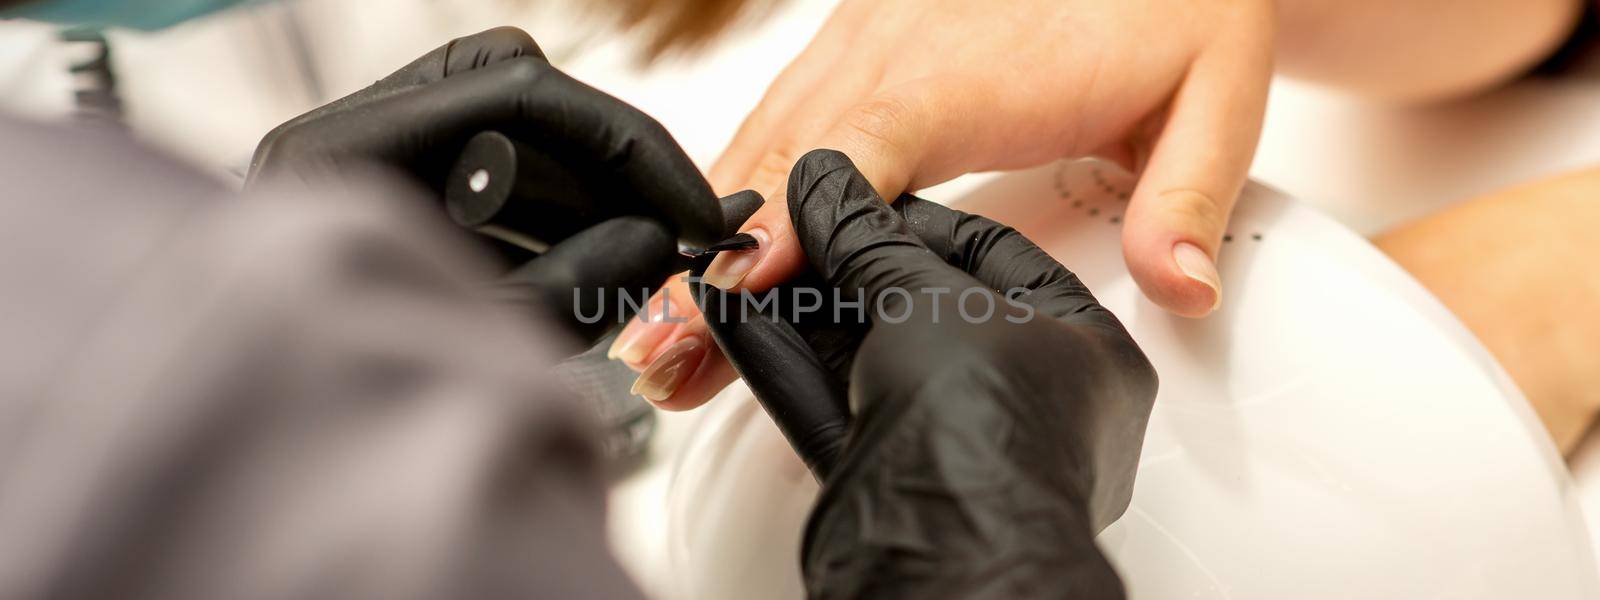 Manicure painting process. Manicure master paint the nails with transparent varnish in a nail salon, close up. by okskukuruza